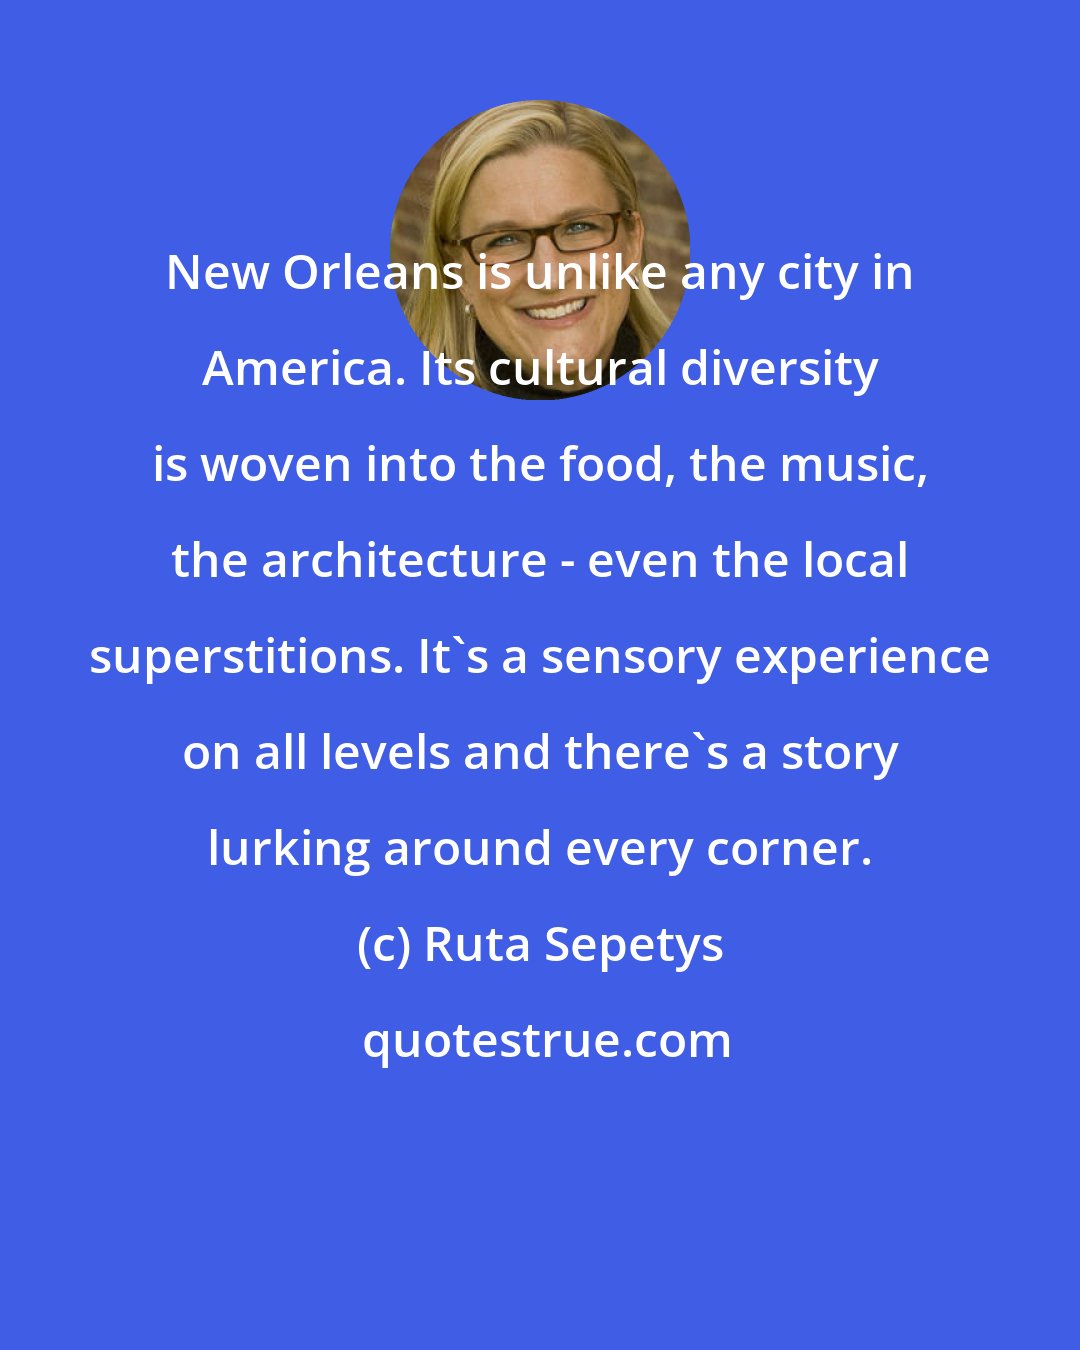 Ruta Sepetys: New Orleans is unlike any city in America. Its cultural diversity is woven into the food, the music, the architecture - even the local superstitions. It's a sensory experience on all levels and there's a story lurking around every corner.